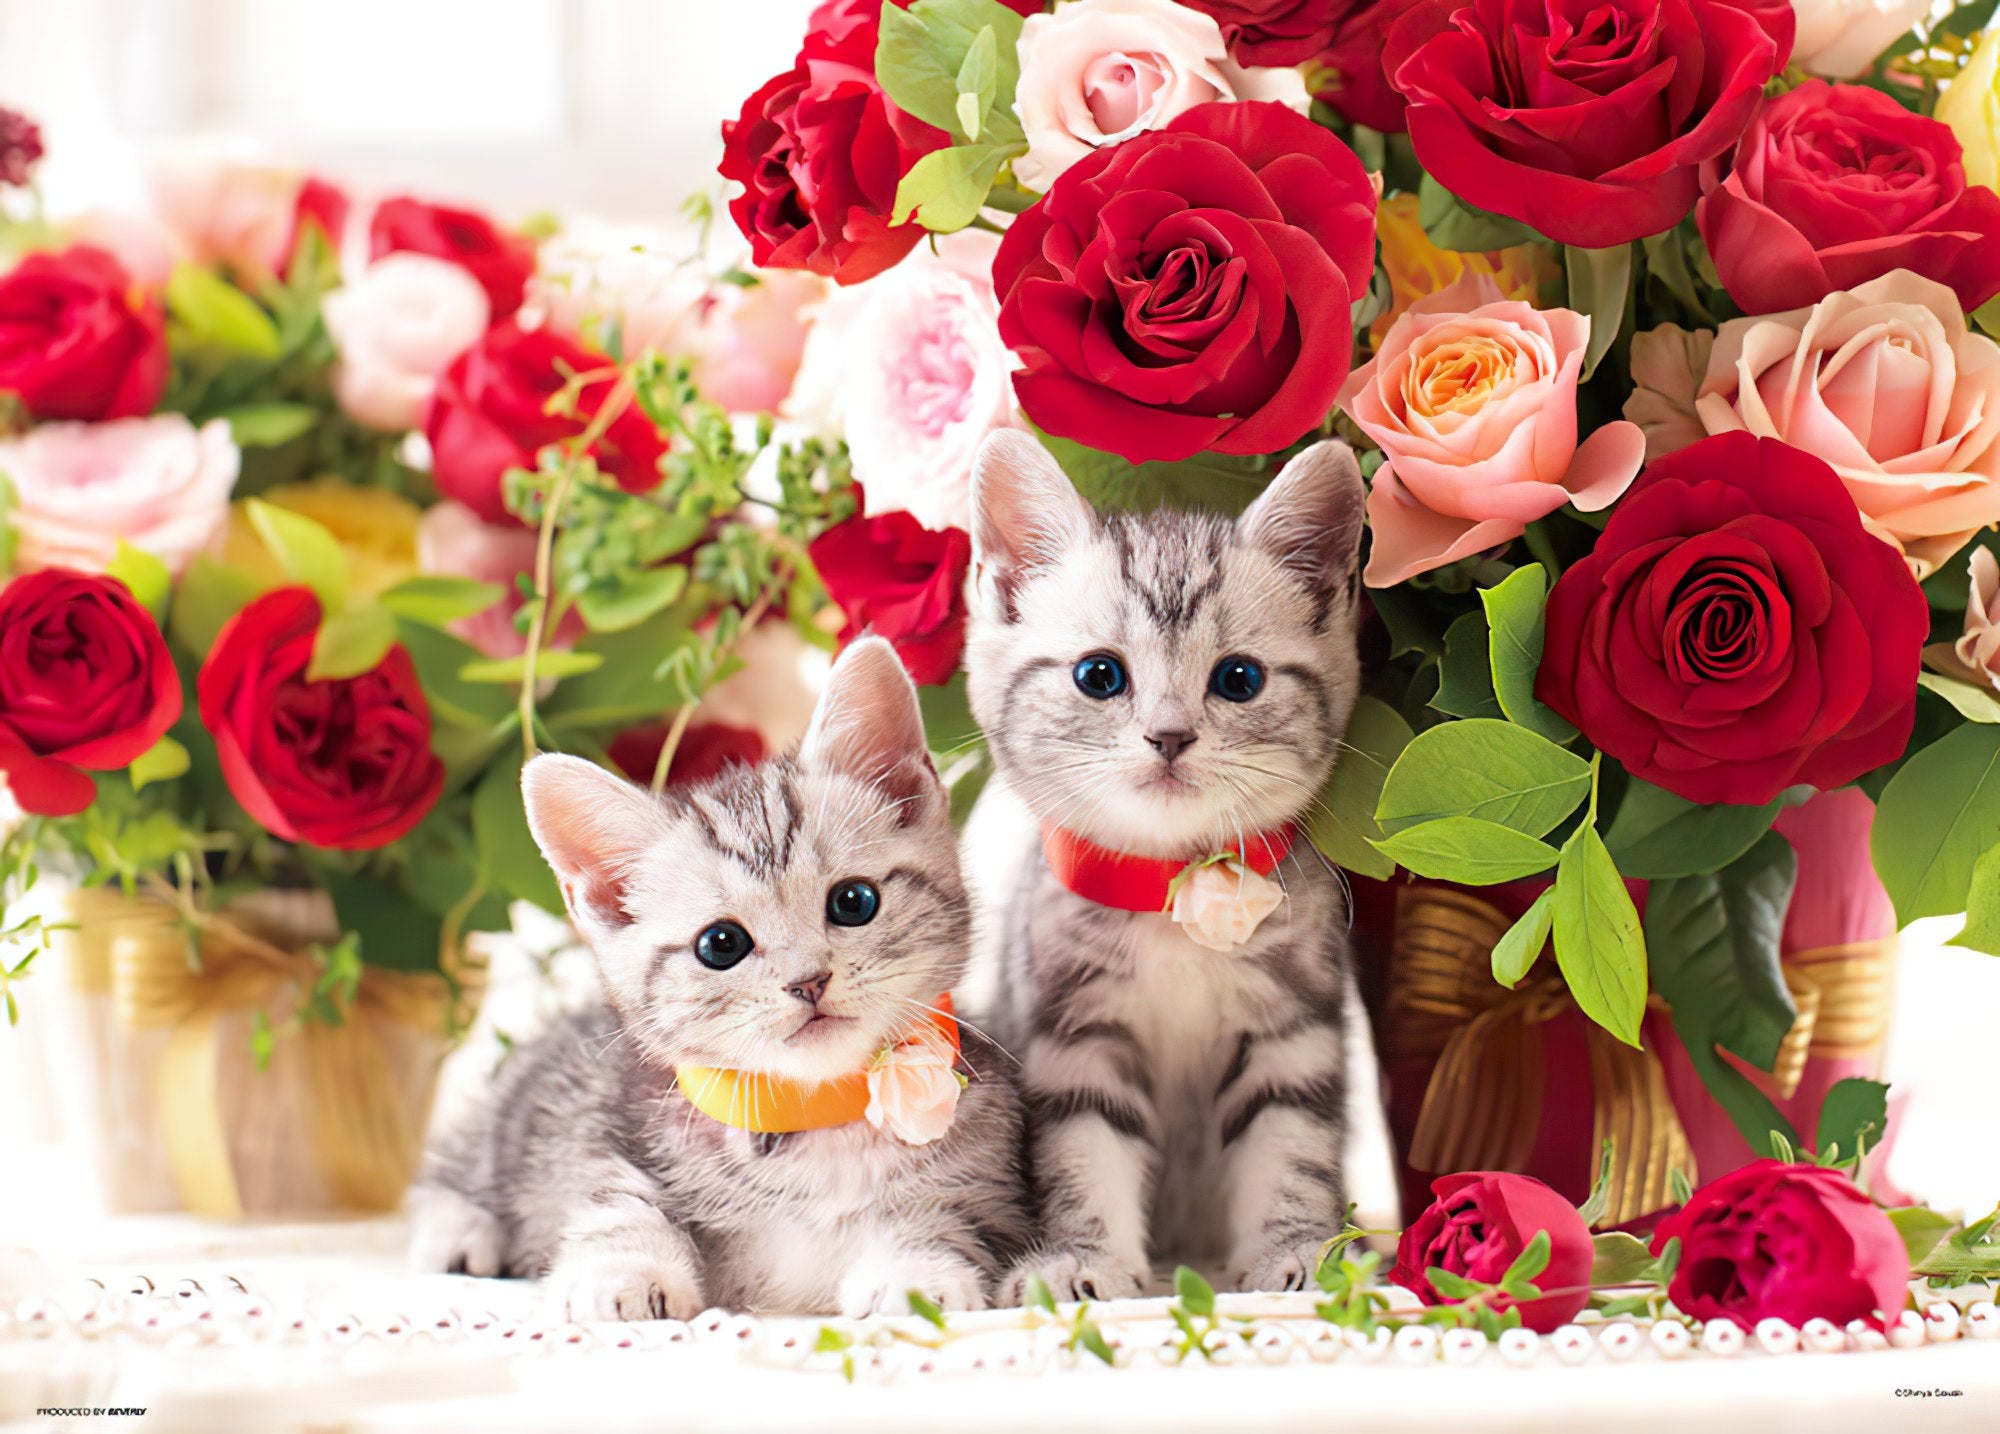 Beverly • Animal • Kittens and Roses　600 PCS　Jigsaw Puzzle